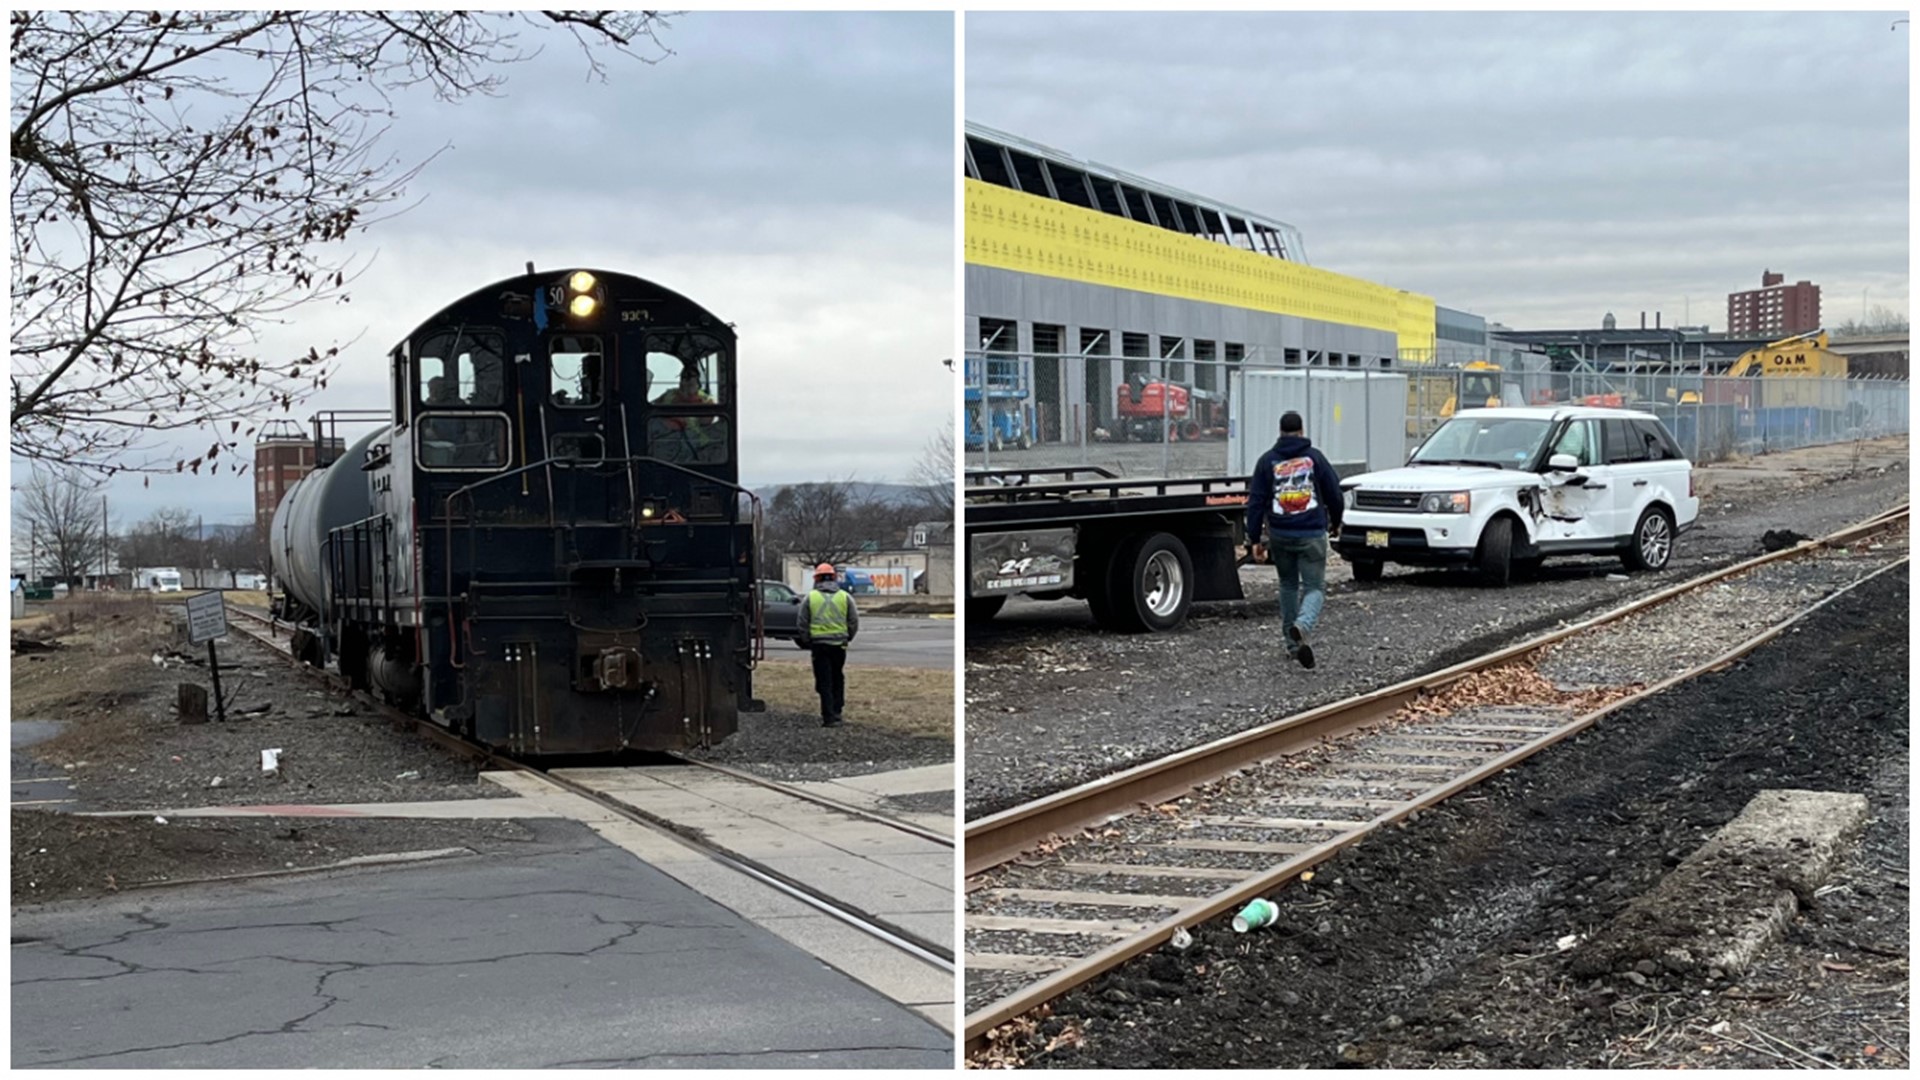 It happened Tuesday morning at a railroad crossing at the intersection of Hazle Street and Penn Avenue.